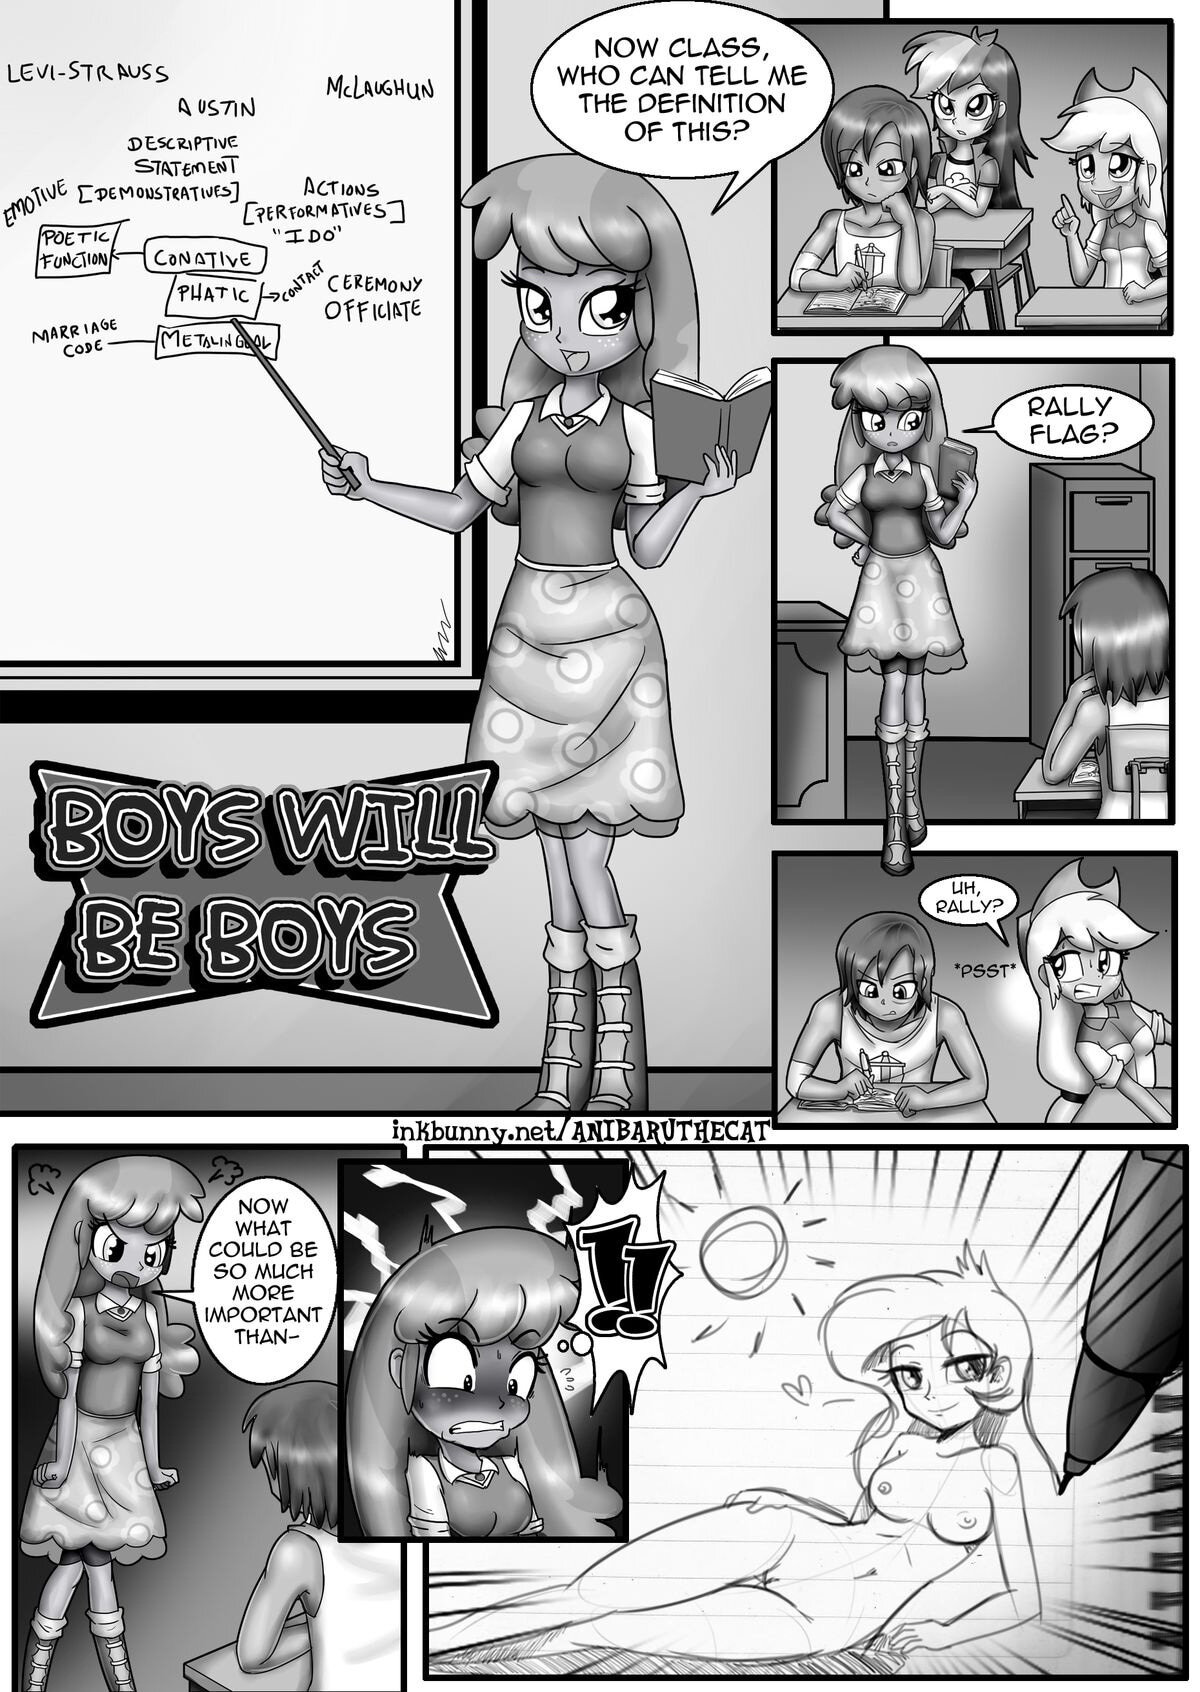 Boys will be Boys - Page 2